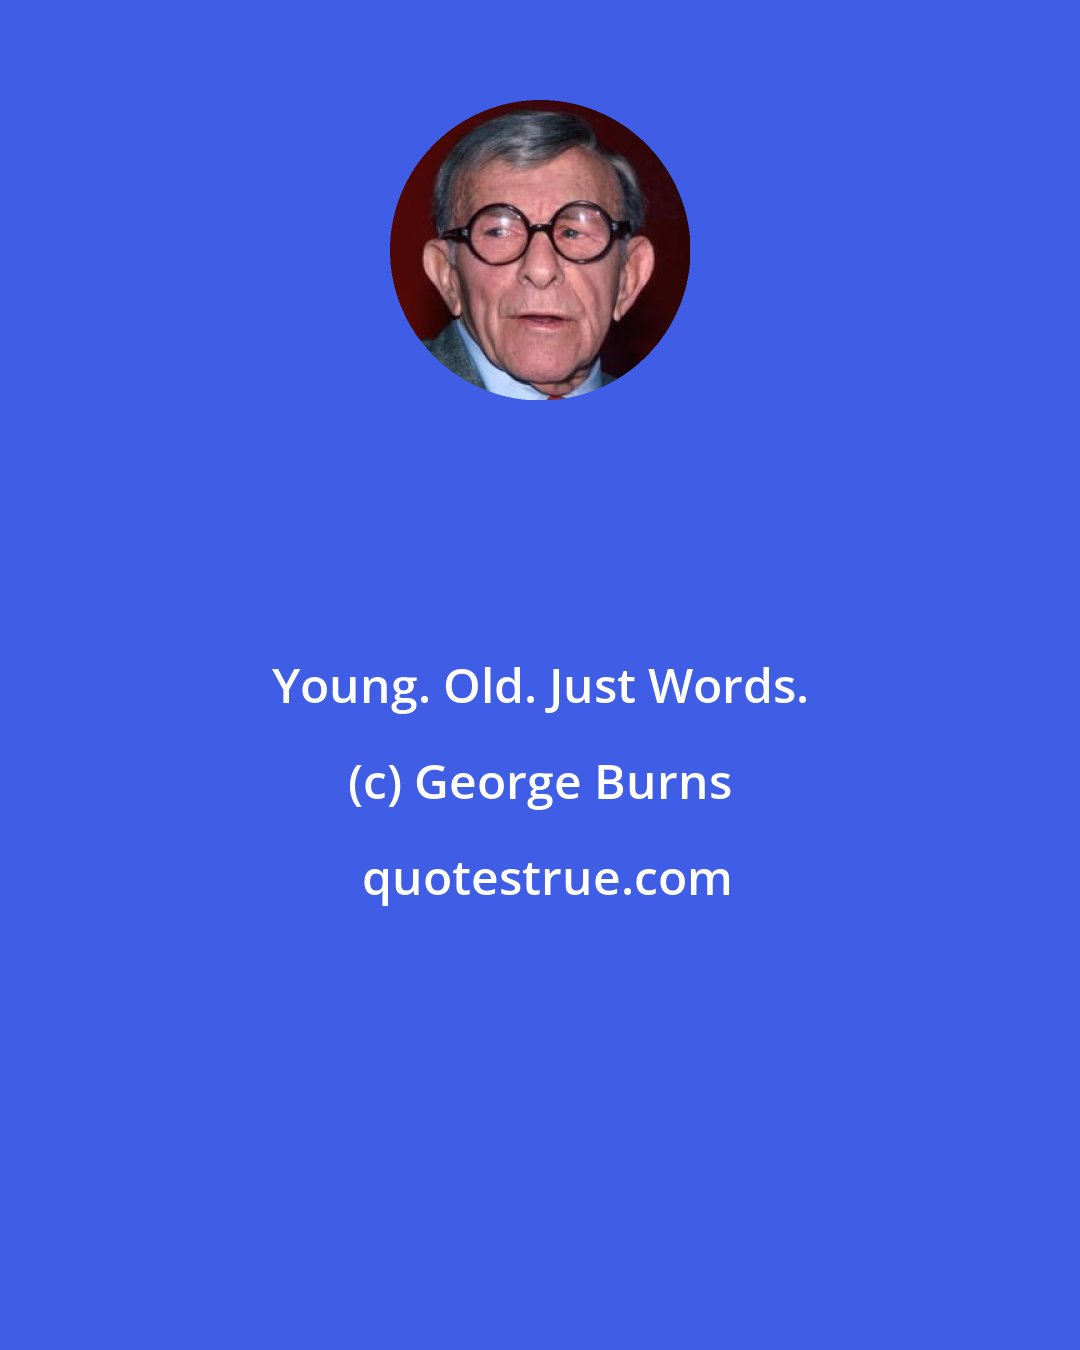 George Burns: Young. Old. Just Words.